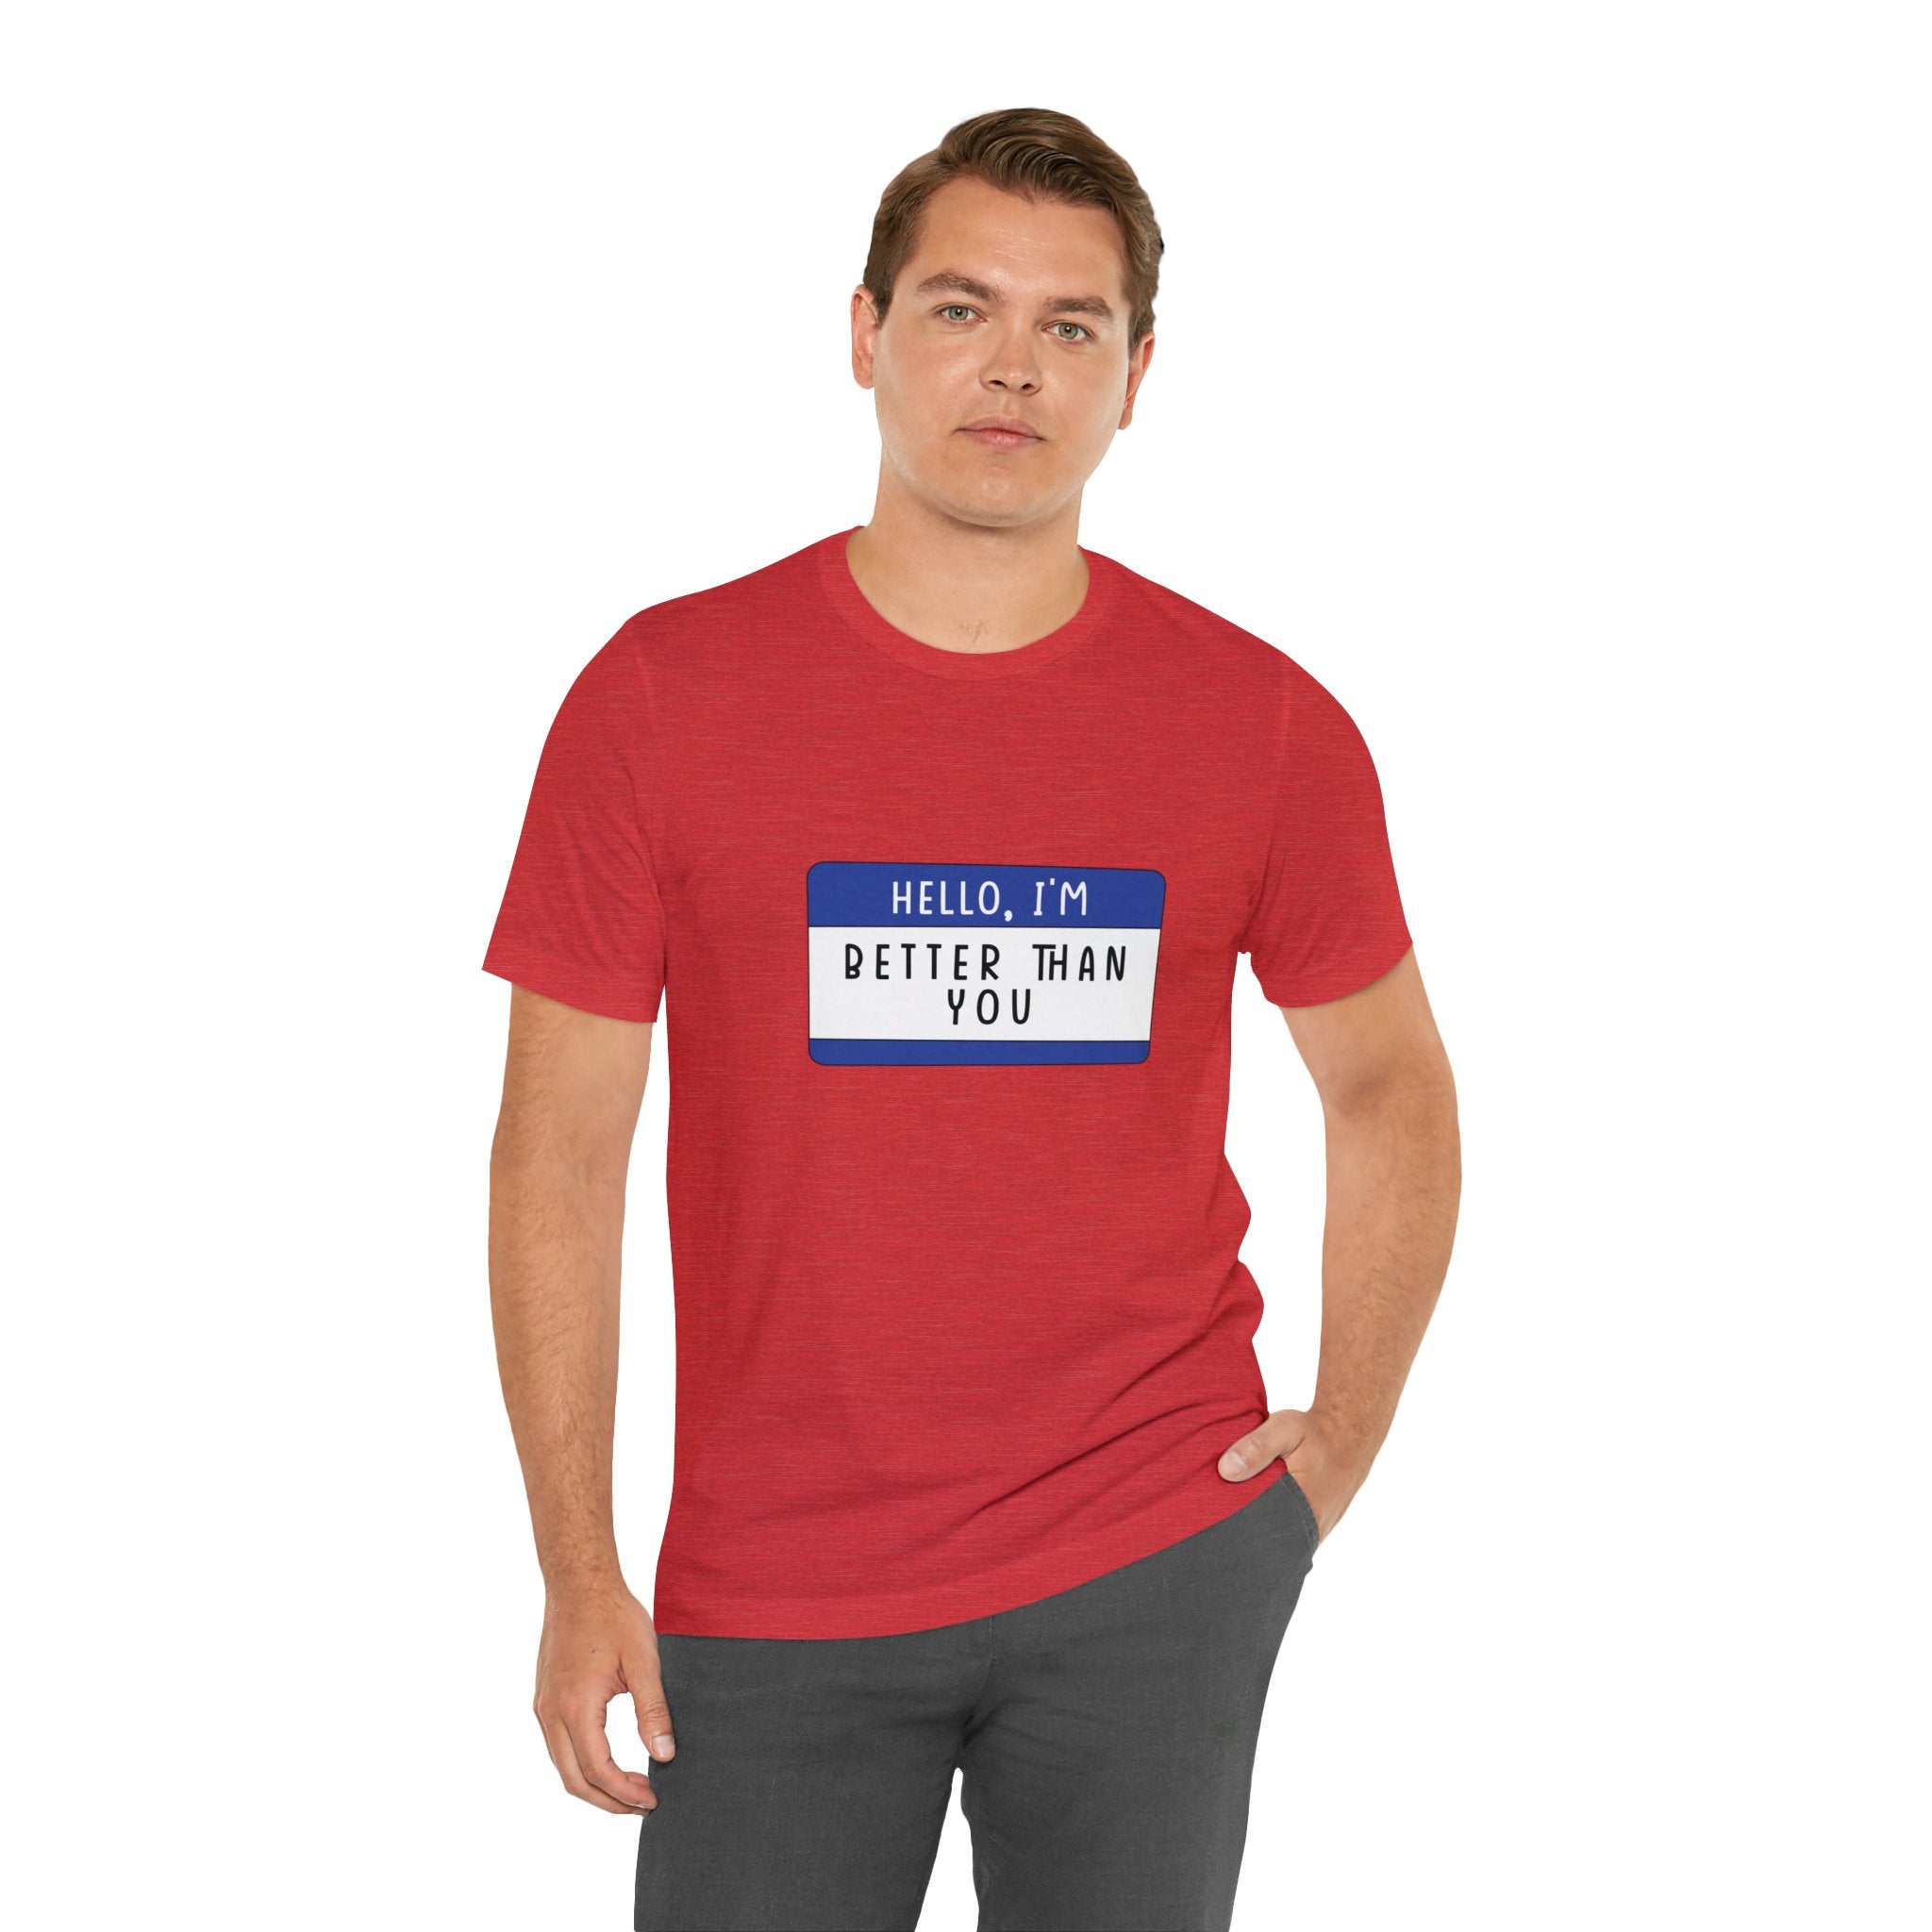 Sentence with Product Name: Man in a Hello, I'm Better Than You T-Shirt with geeky charm, sporting a blue name tag graphic that reads "hello, i'm better than you," posing with one hand on his hip.